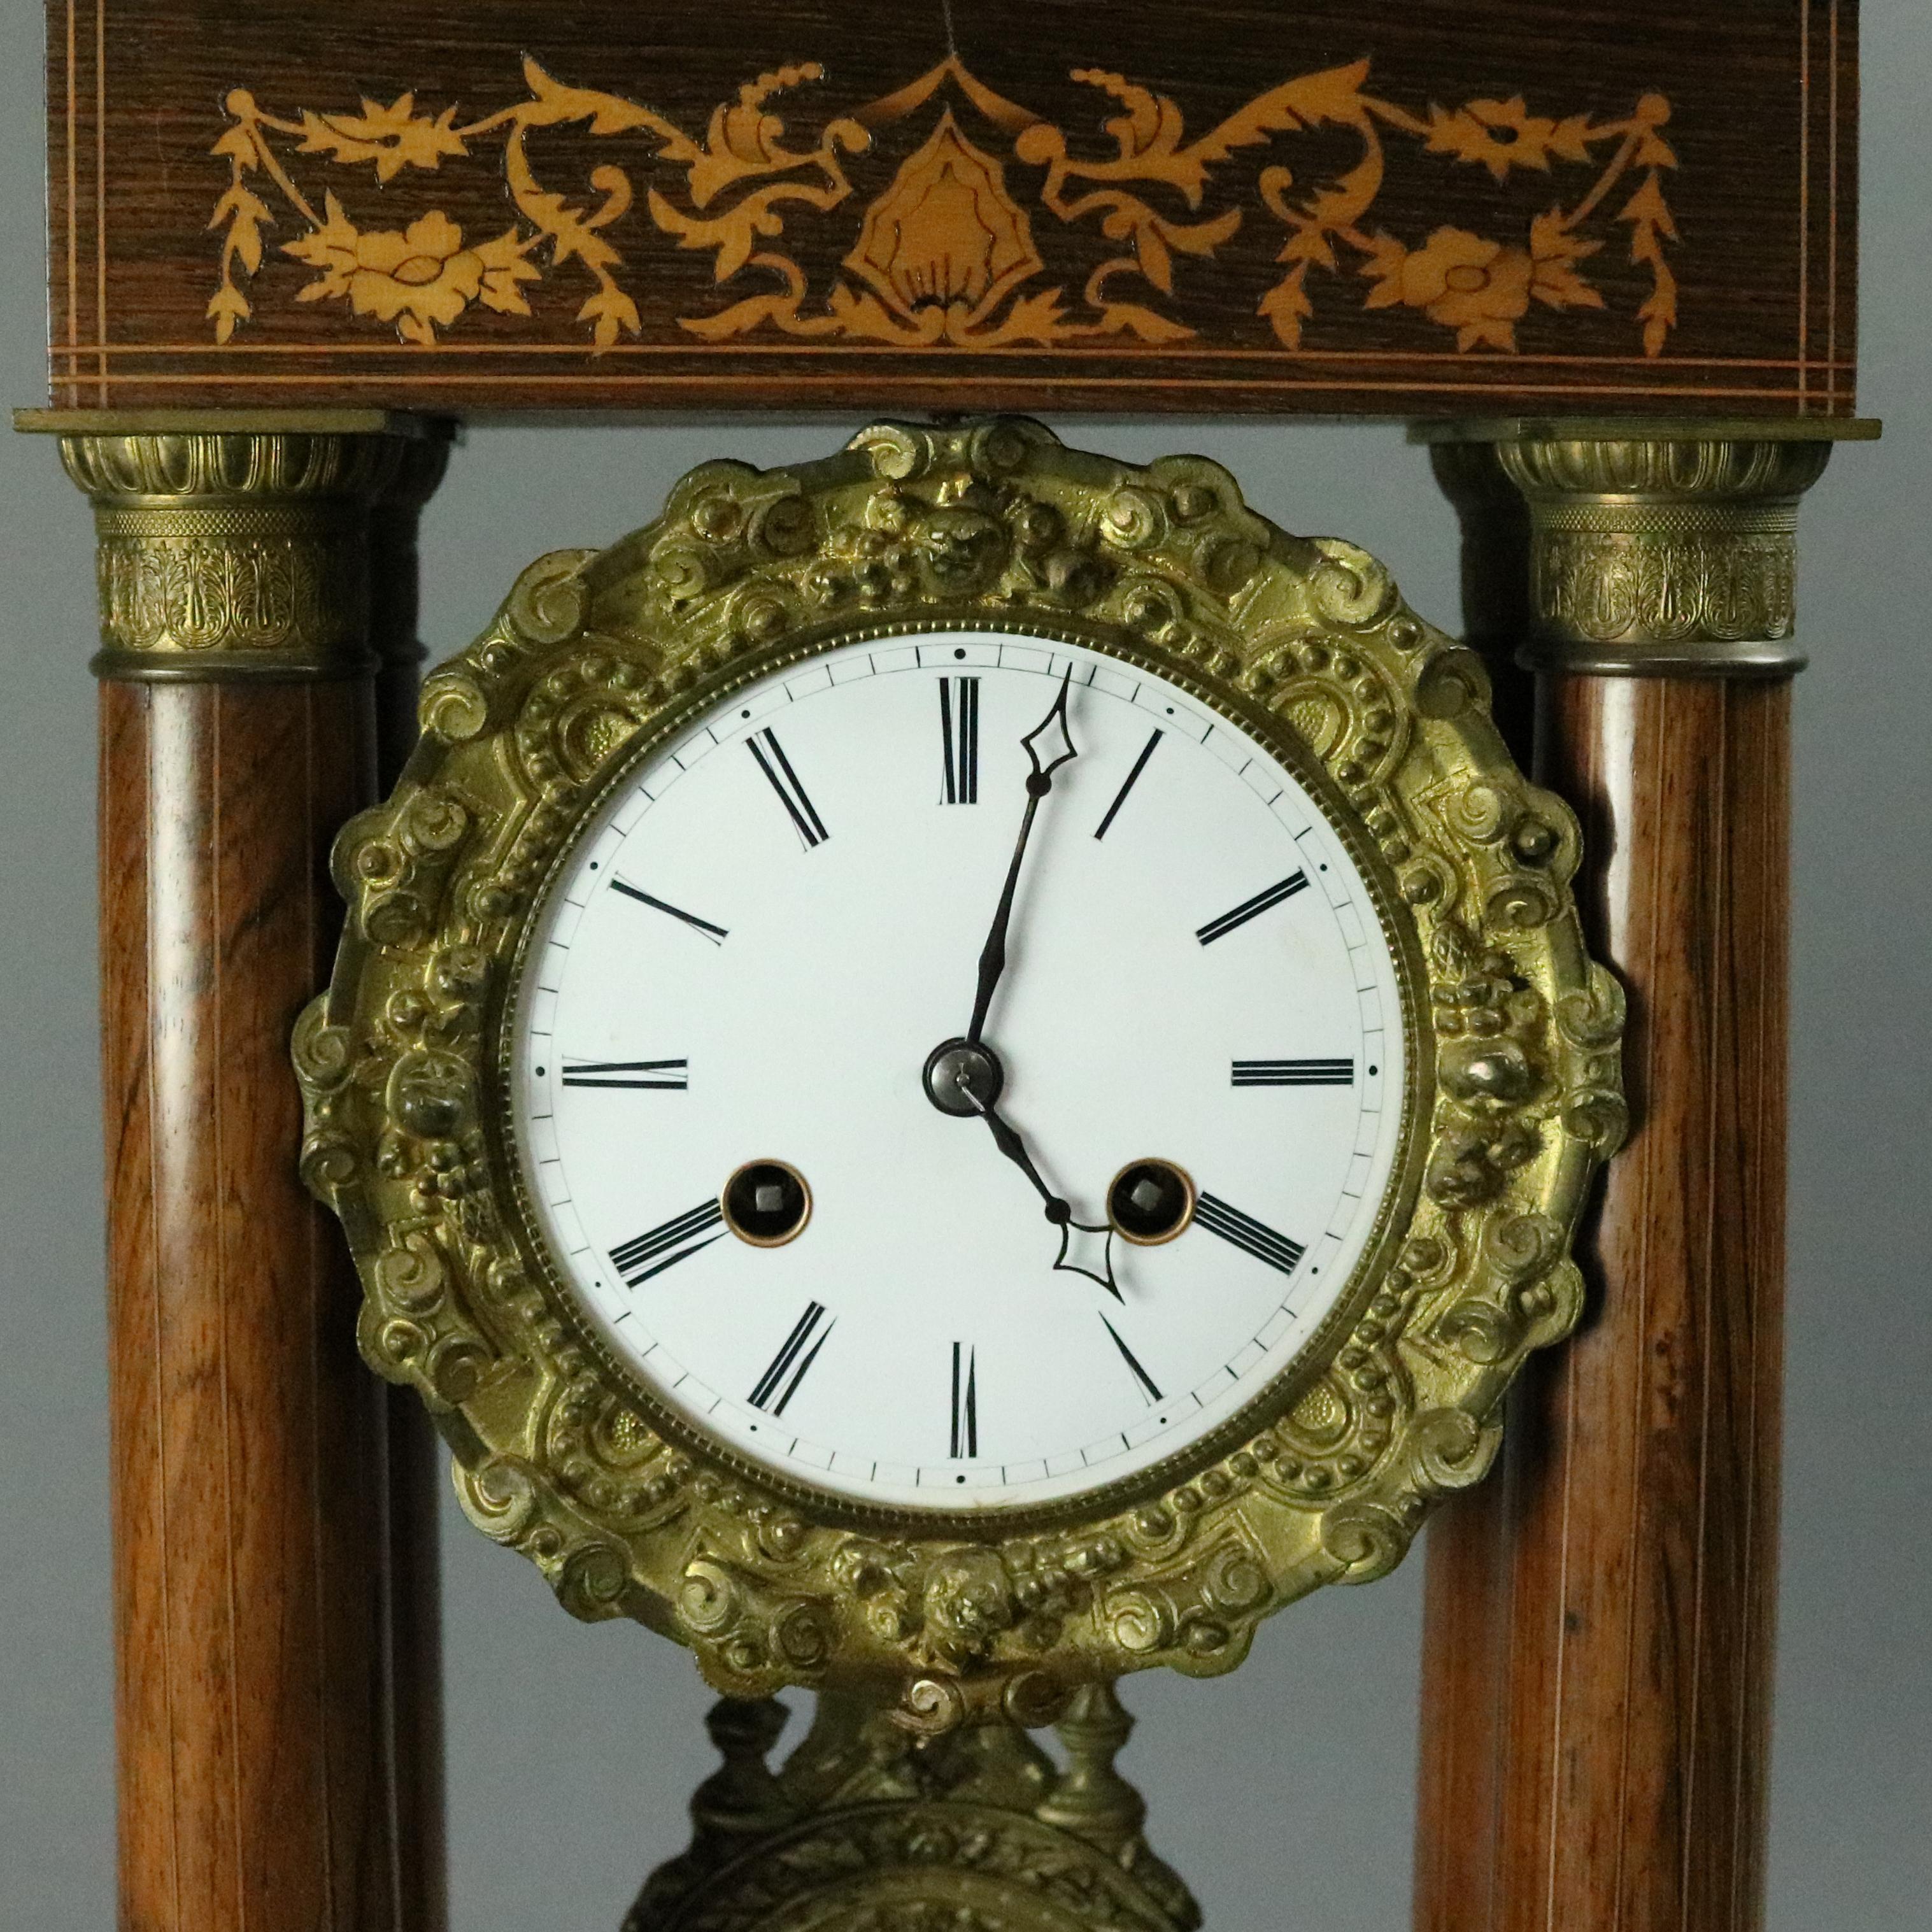 Antique mahogany French Empire portico clock features mahogany marquetry and bronze case with satinwood foliate inlay and banding, bronze column capitals and bases, porcelain dial with bronze surround, bronze mask pendulum, works signed Medaille